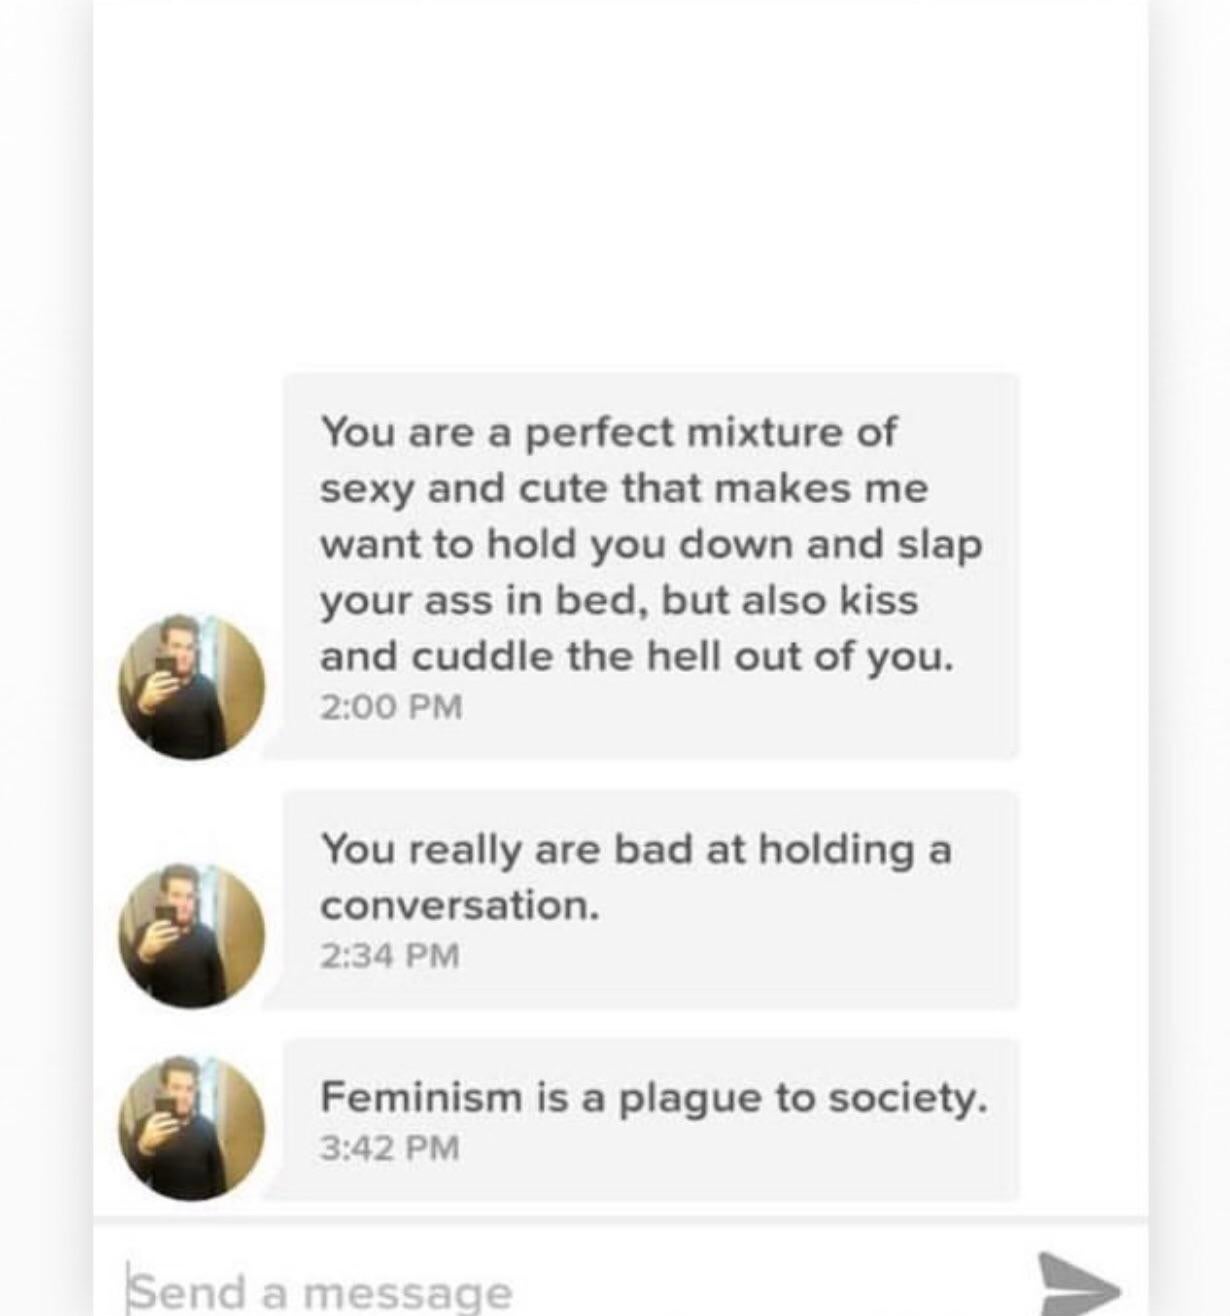 You are a perfect mixture of sexy and cute that makes me want to hold you down and slap your ass in bed, but also kiss and cuddle the hell out of you. You really are bad at holding a conversation. Feminism is a plague to society. Send a message